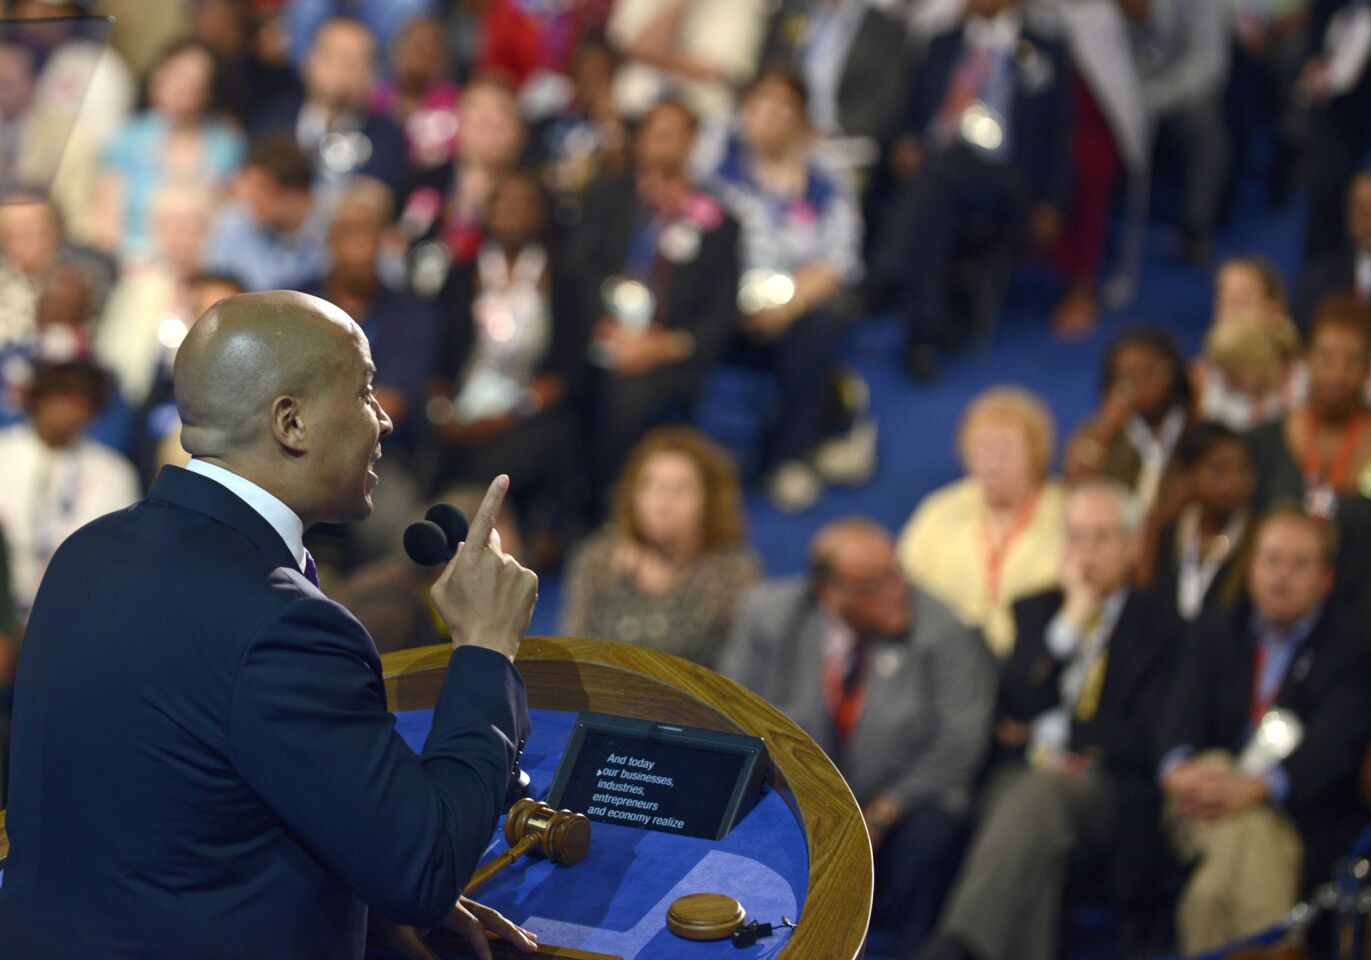 Newark, N.J., Mayor Cory Booker speaks to the audience in Charlotte, N.C., on the first day of the Democratic National Convention.